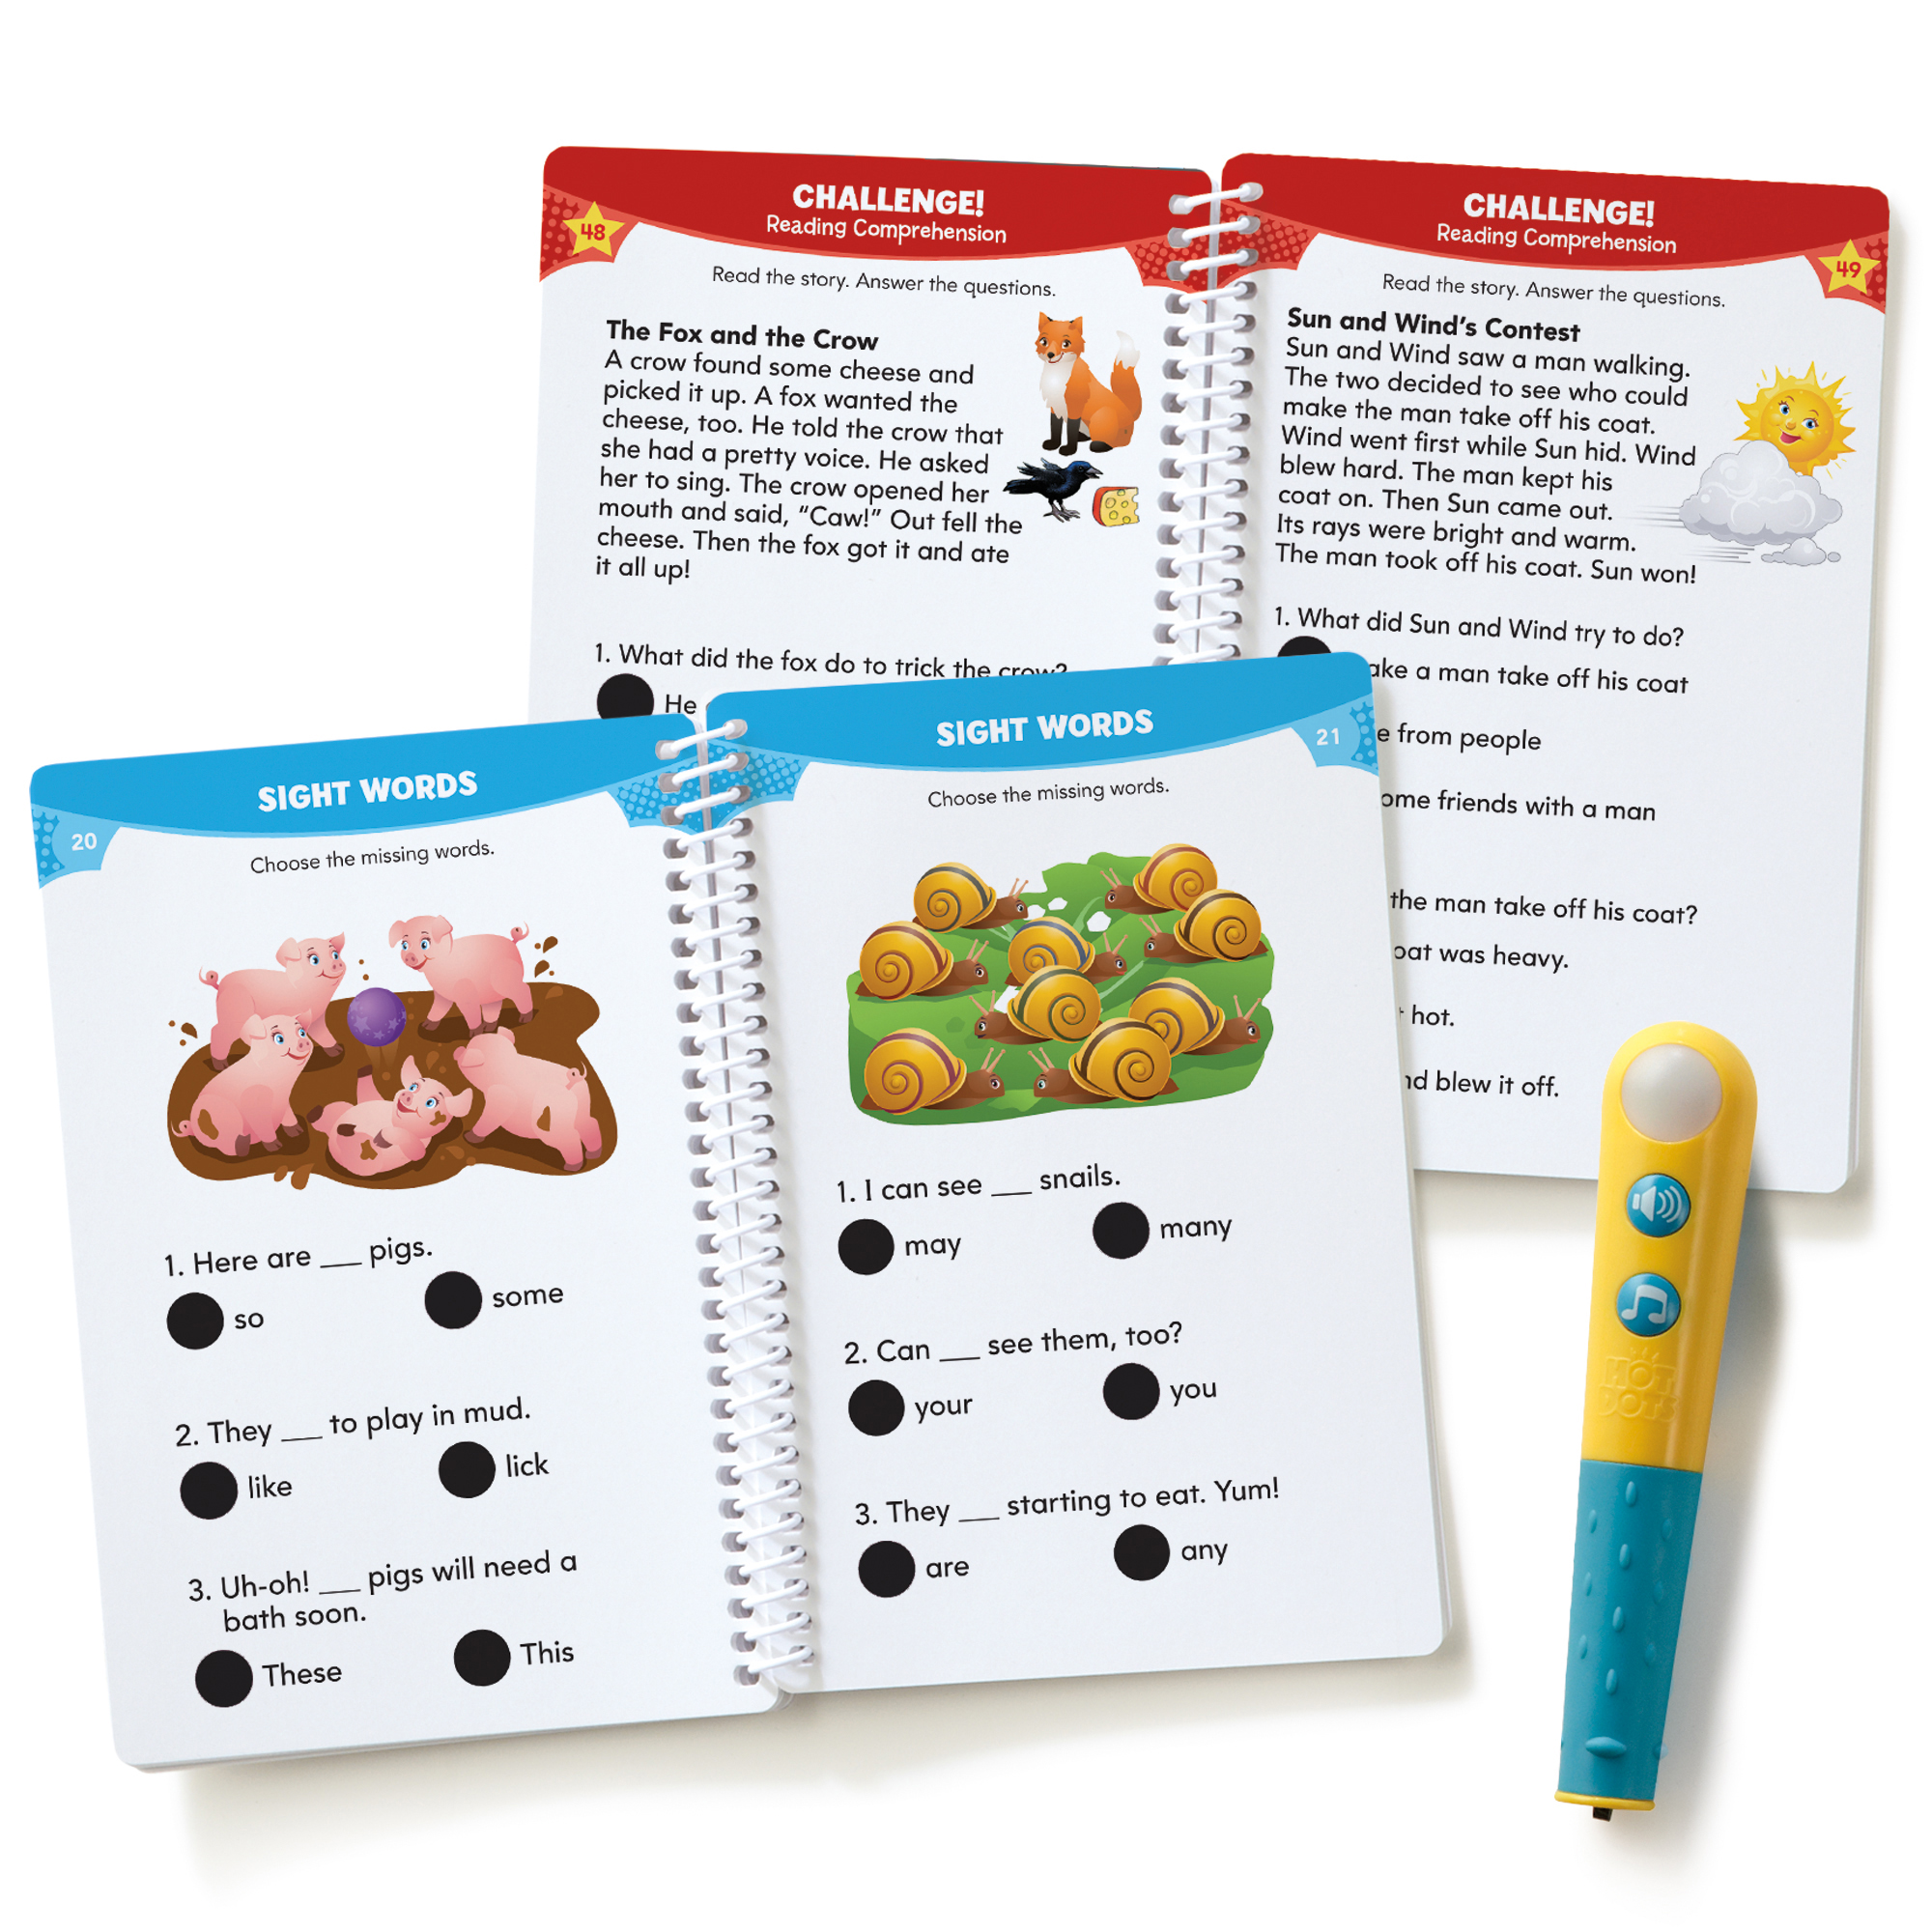 The Teachers' Lounge®  Hot Dots® Let's Master Grade 3 Reading